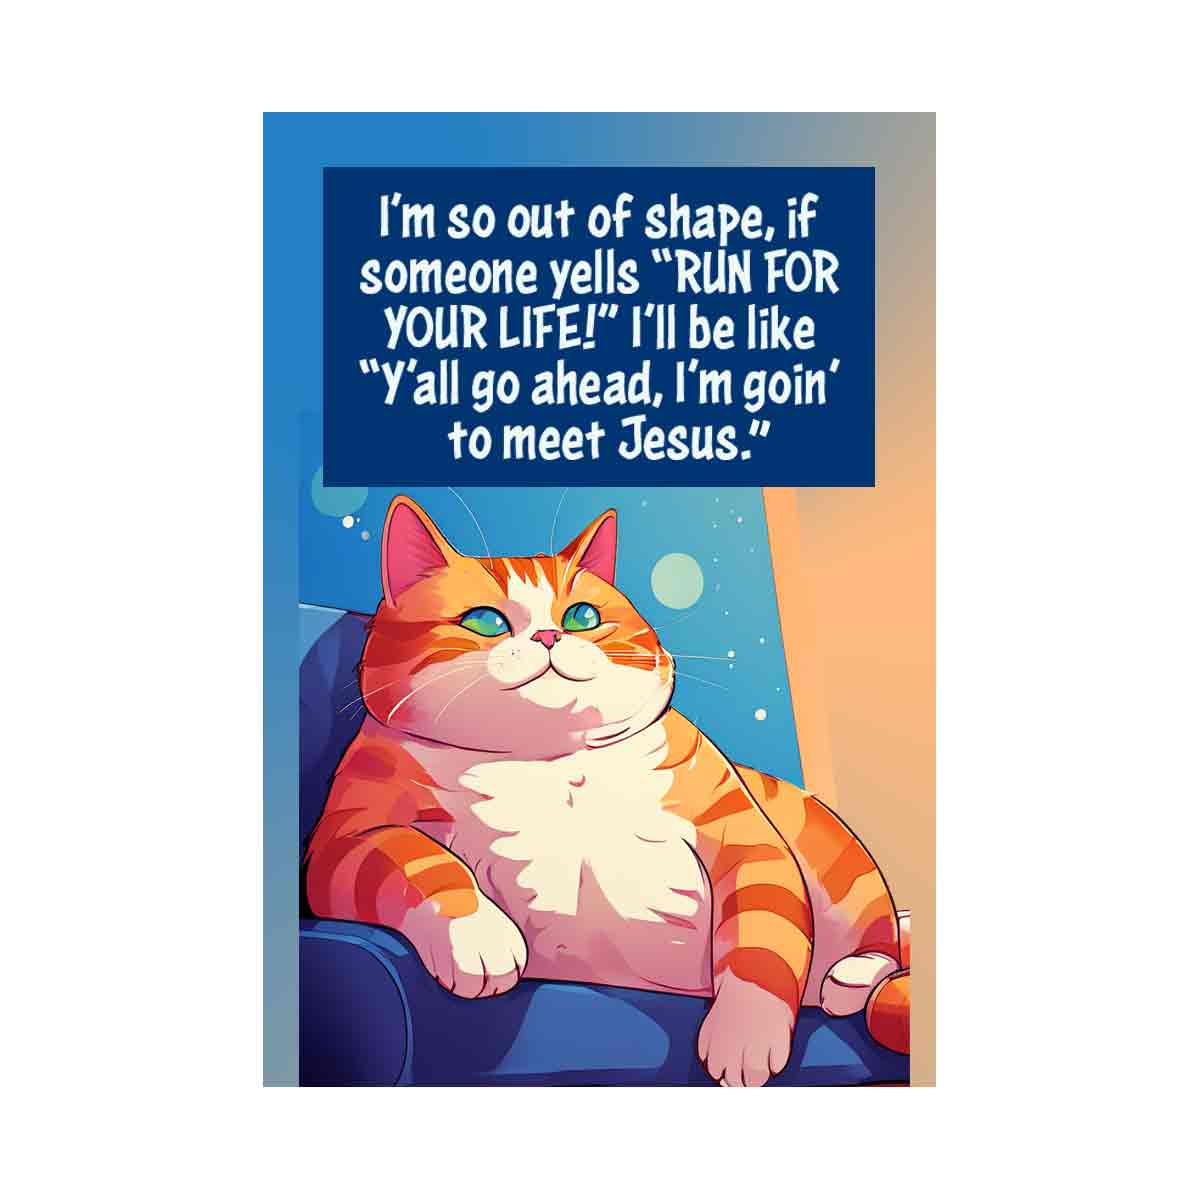 I'm so out of shape fat cat